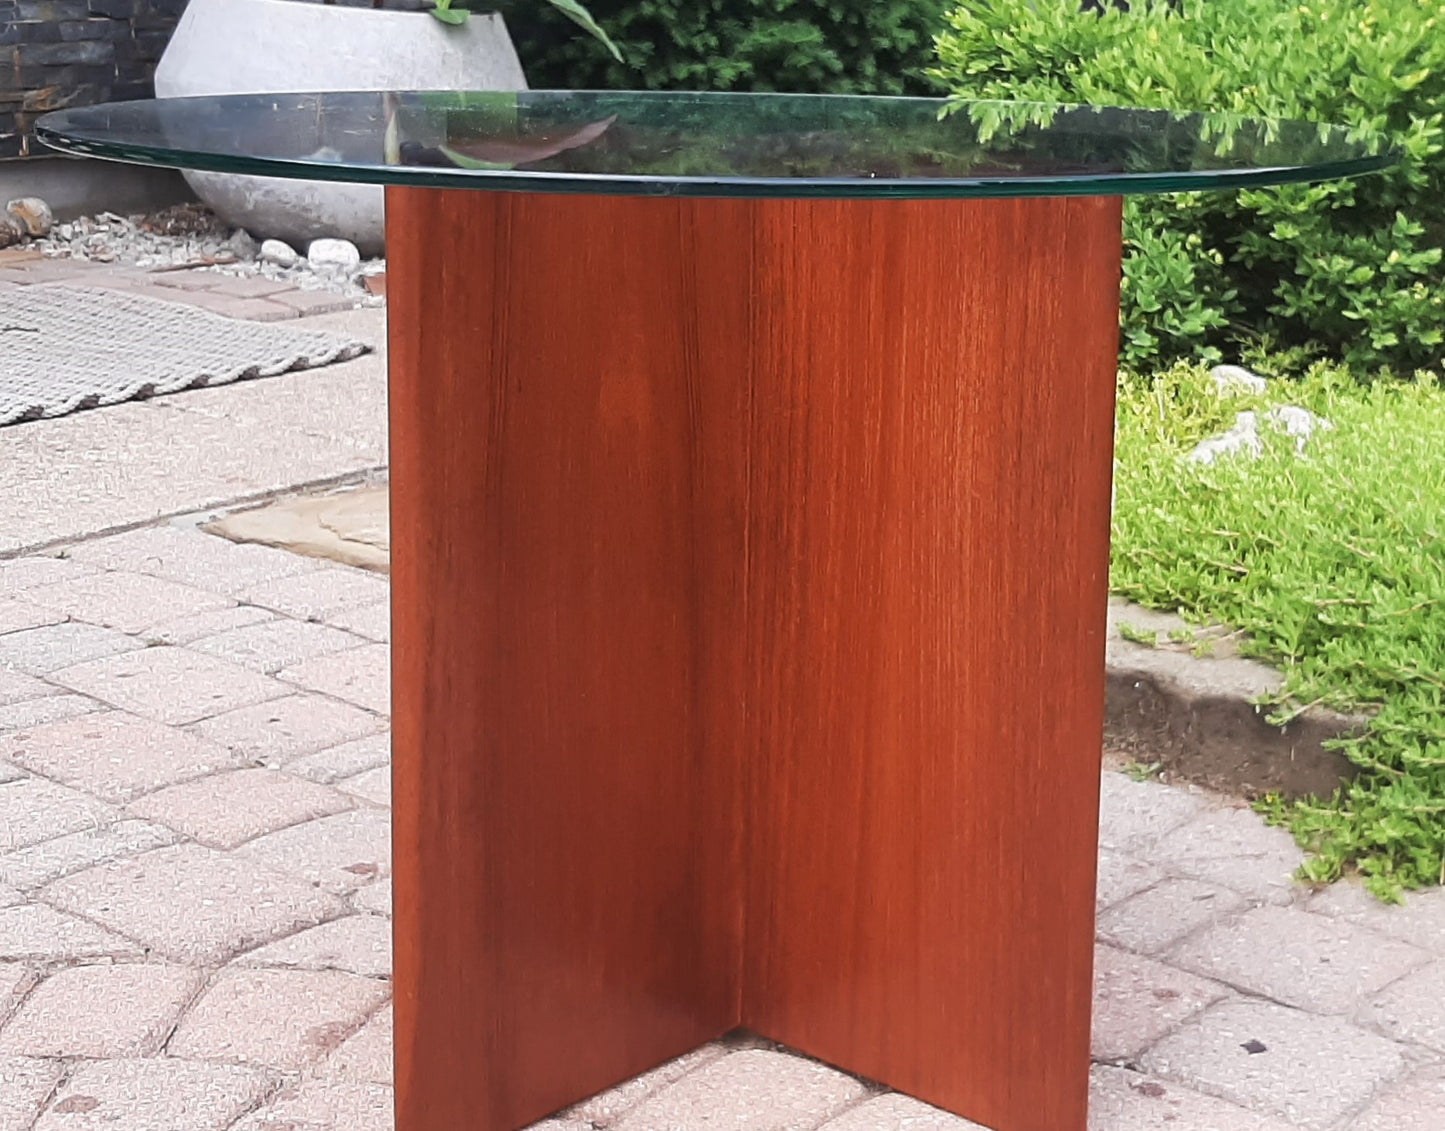 REFINISHED Mid Century Modern Teak & Glass Accent Table, perfect